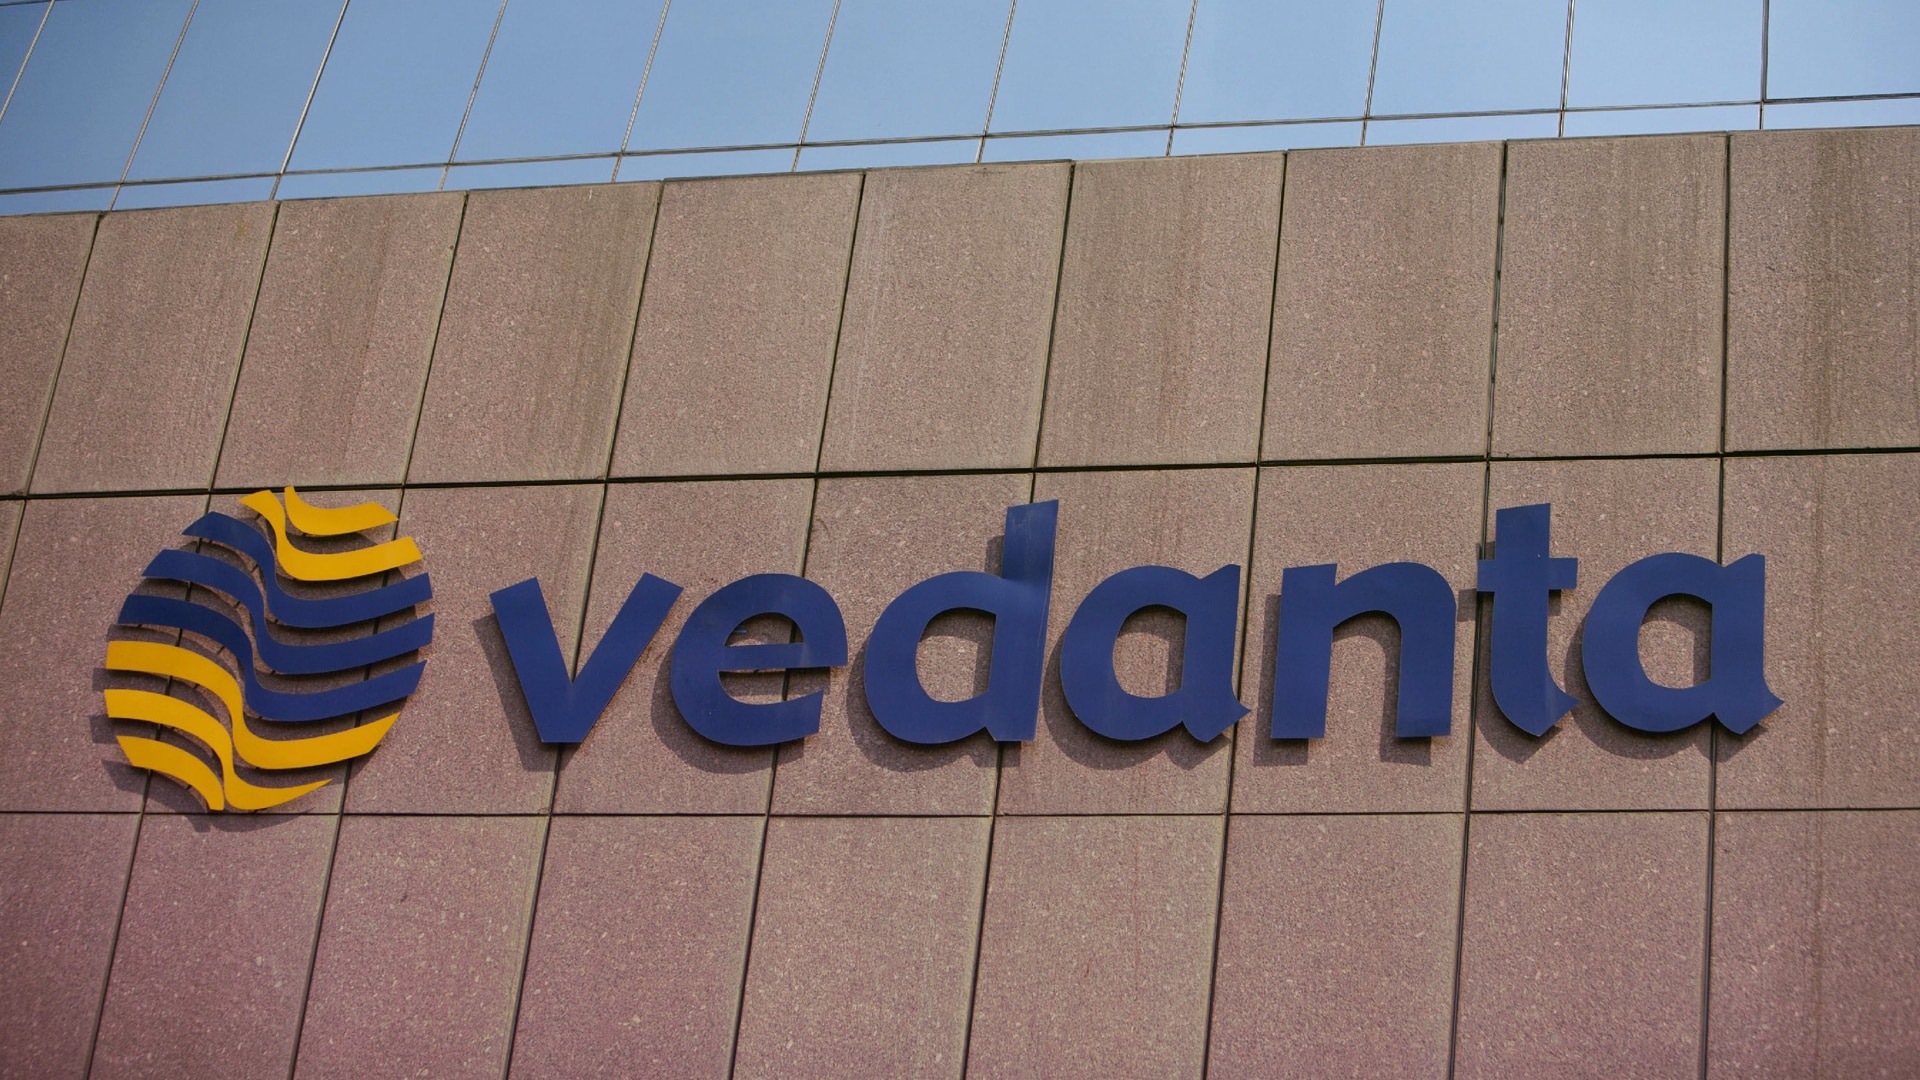 Proceeding with filing fresh application under modified display-scheme; semiconductor application under Govt consideration: Vedanta